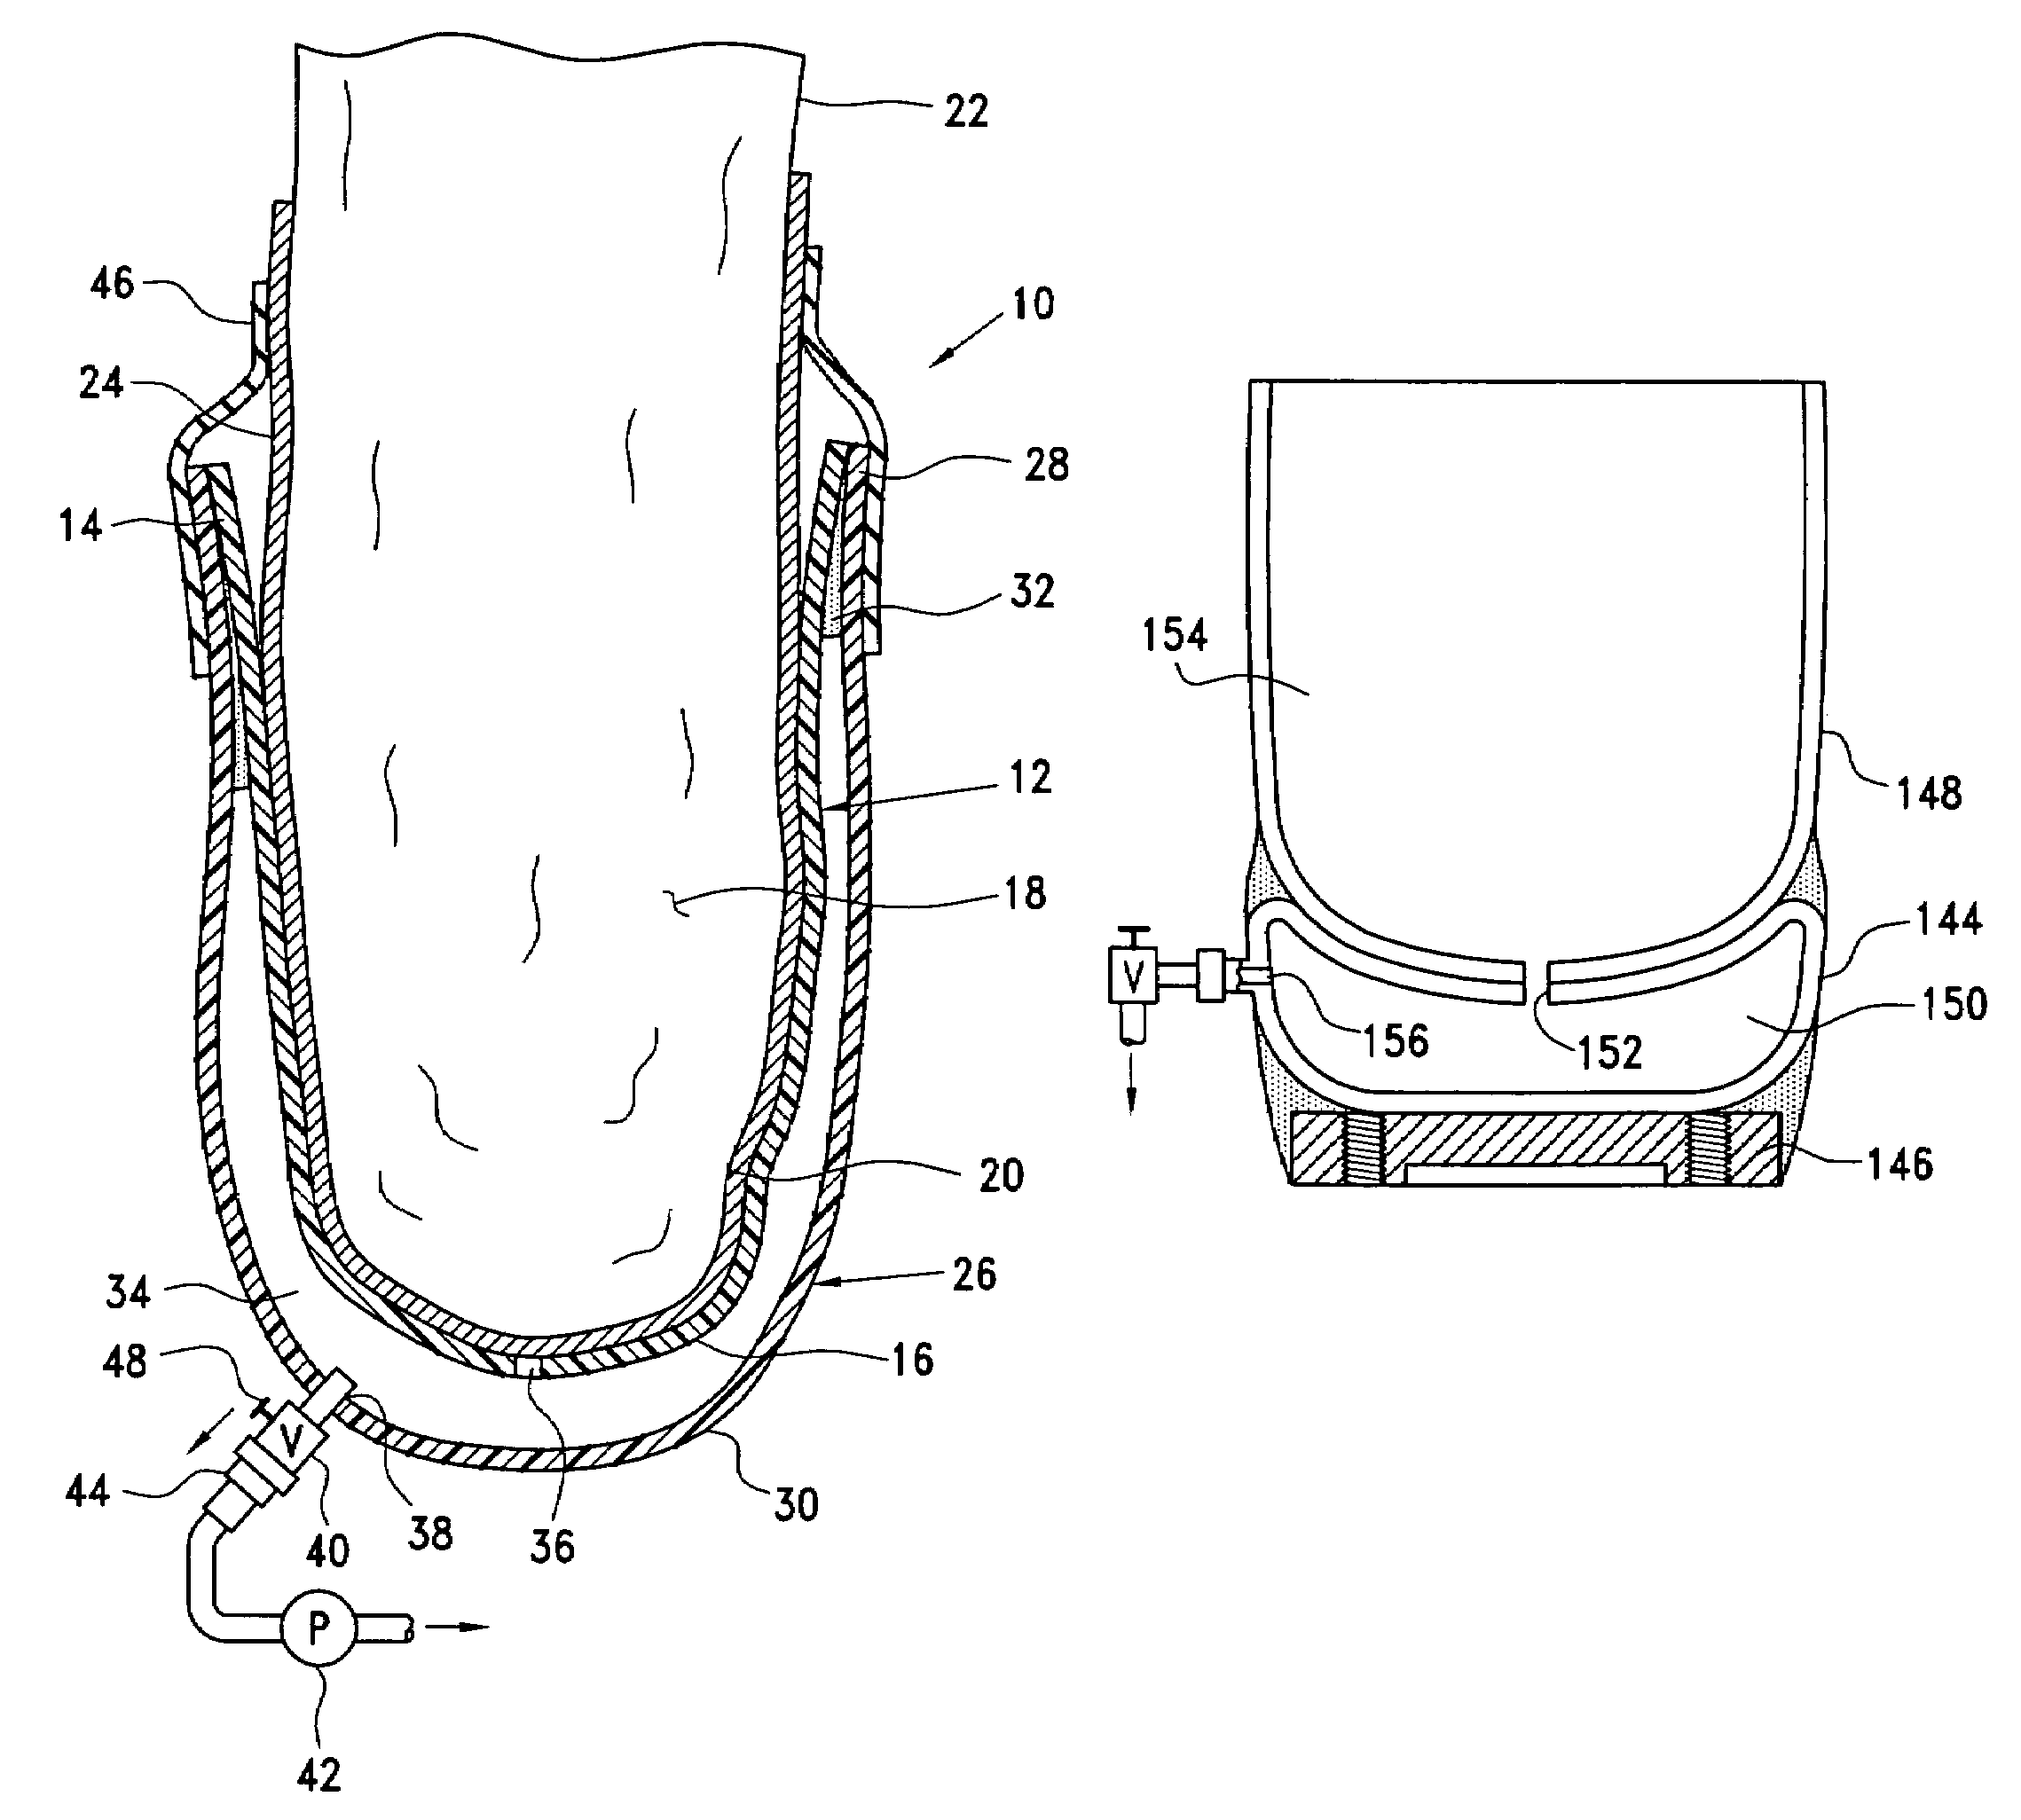 Prosthetic socket with self-contained vacuum reservoir